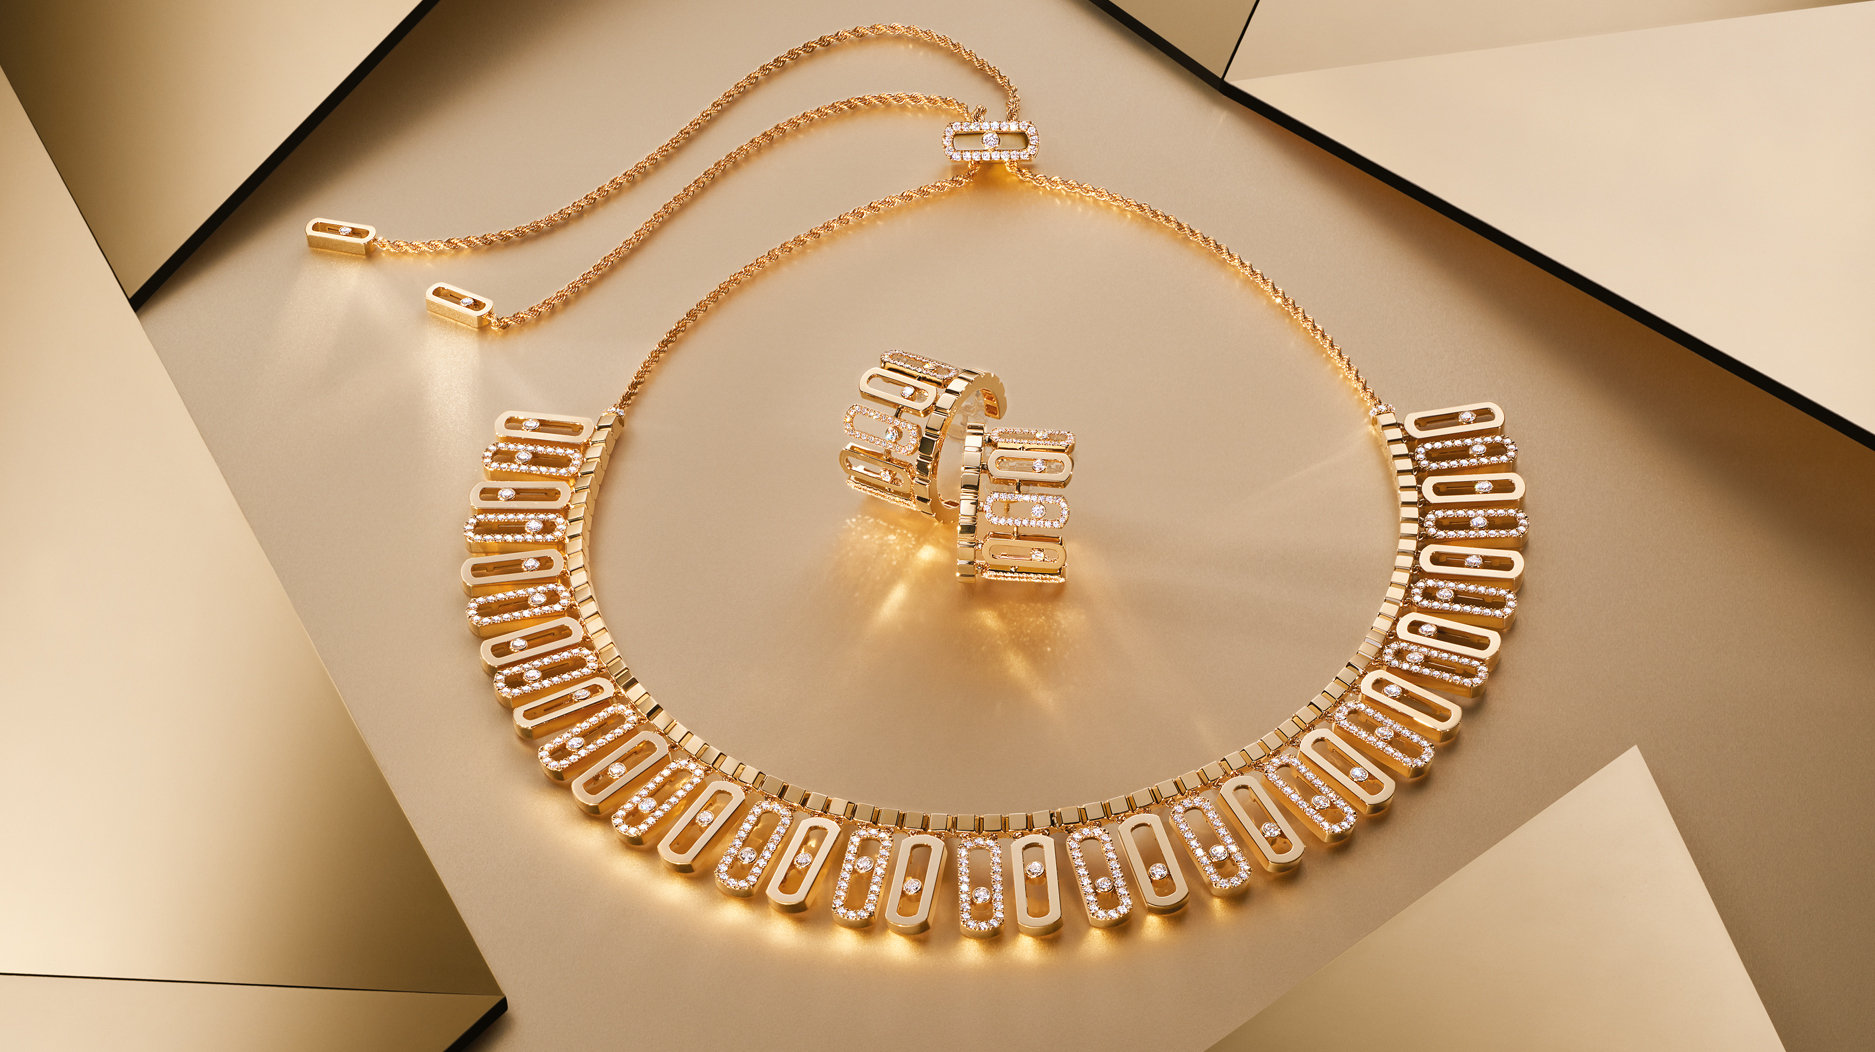 Messika's New High Jewelry Will Have You Teetering on the Edge – JCK